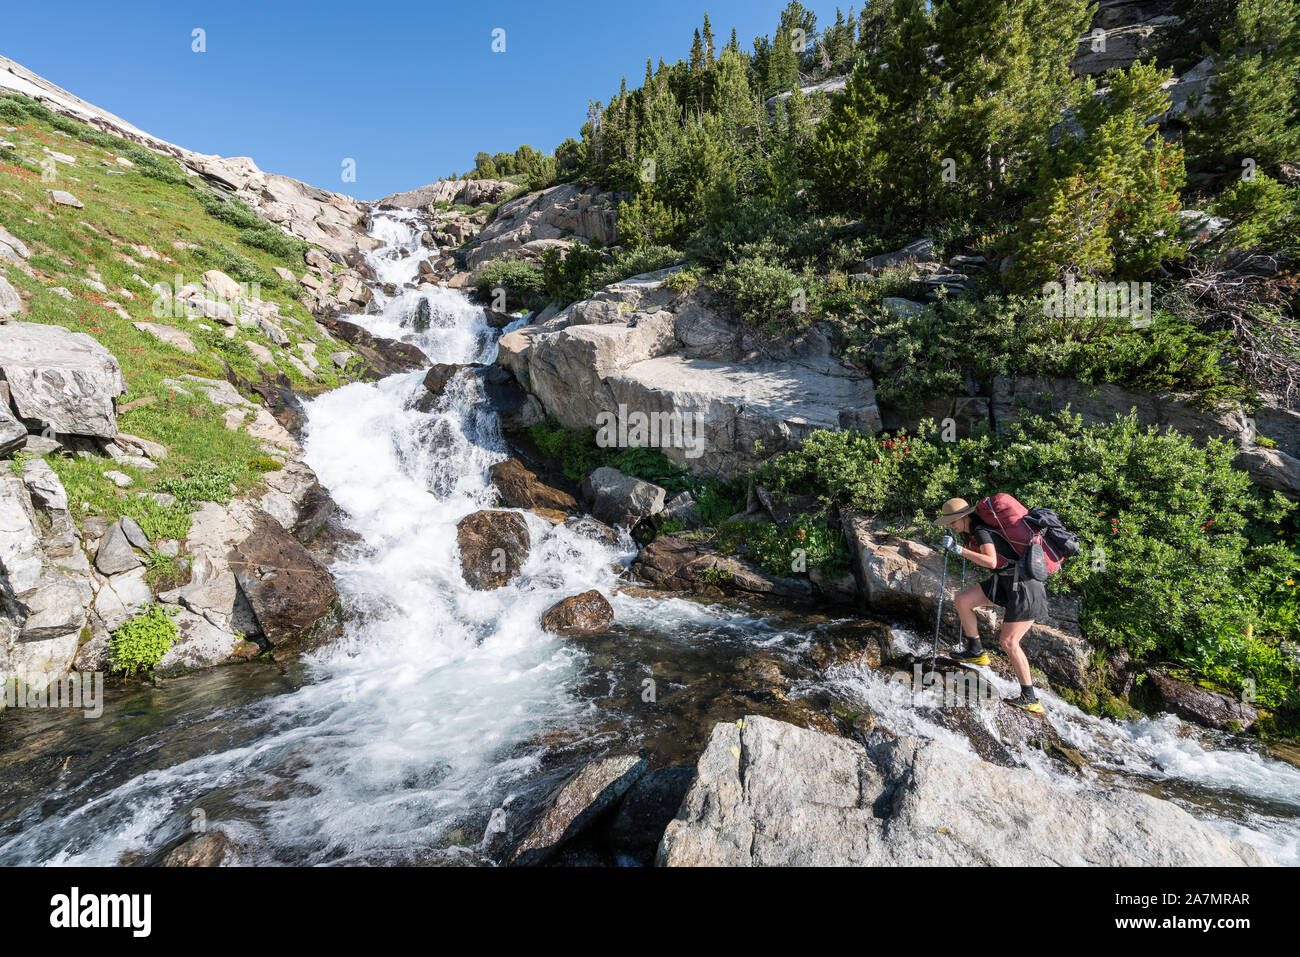 Hiking on the Wind River High Route, Wyoming, USA Stock Photo